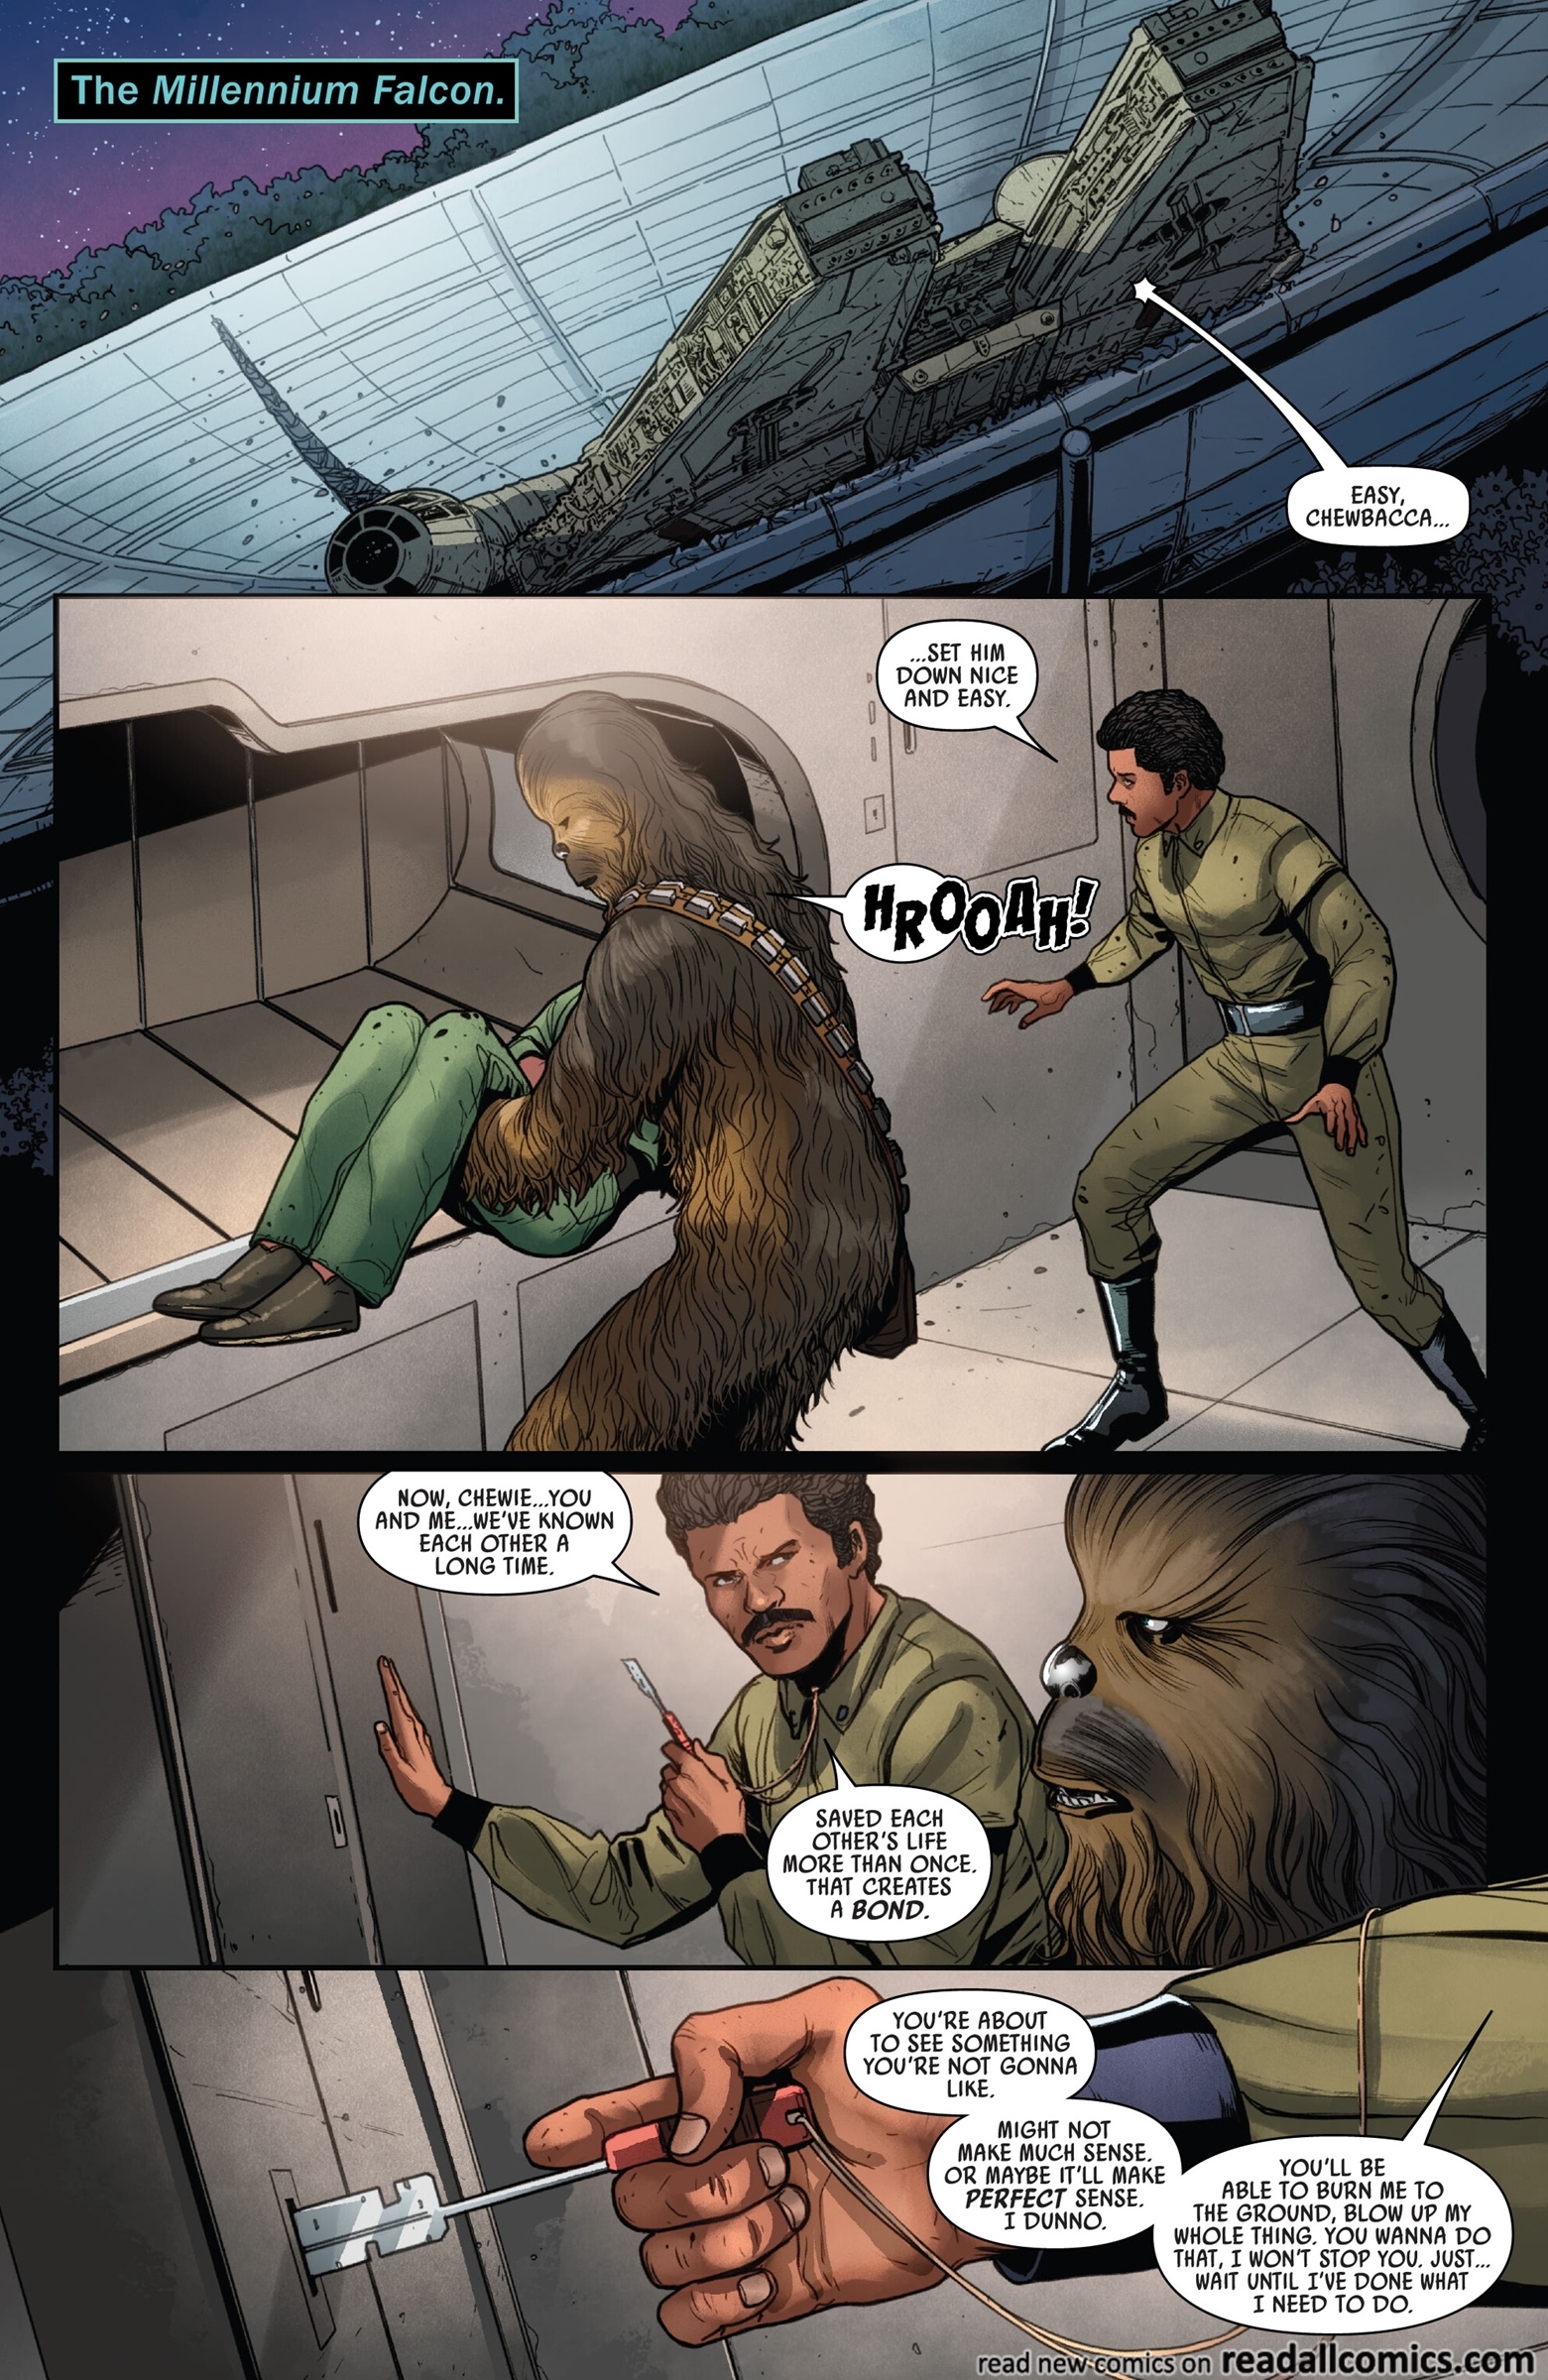 Star Wars V3 041 2018, Read Star Wars V3 041 2018 comic online in high  quality. Read Full Comic online for free - Read comics online in high  quality .